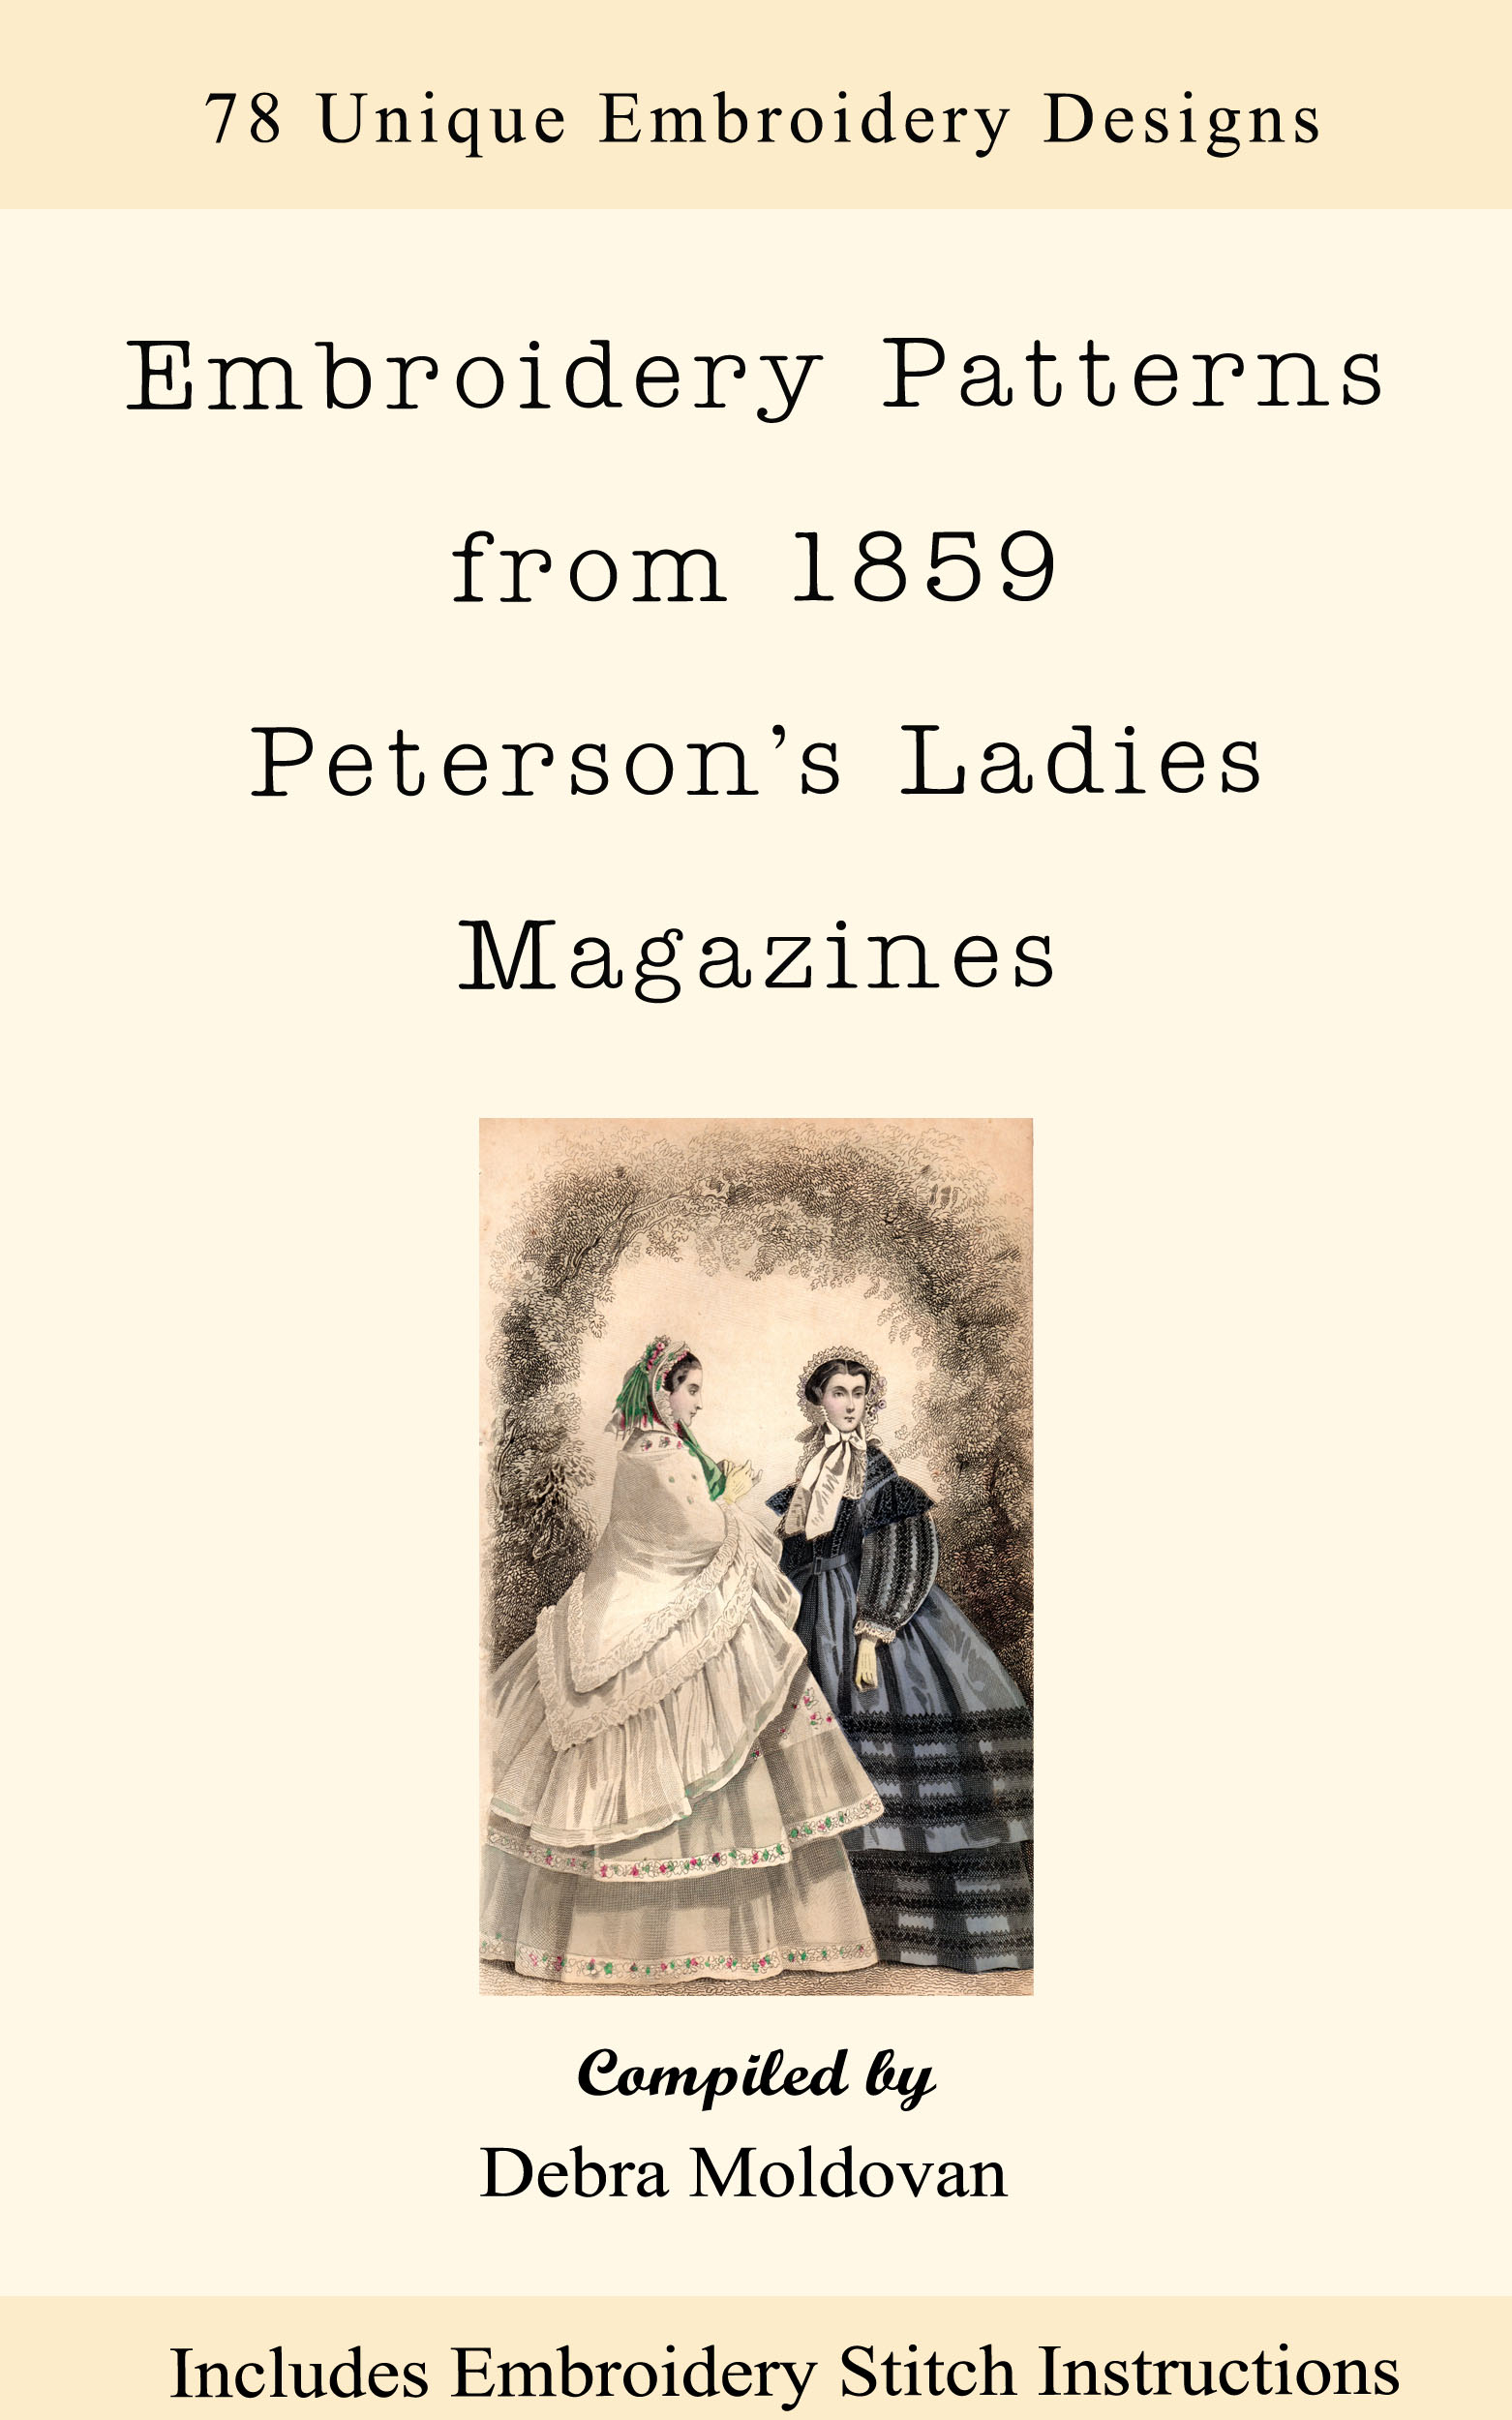 Free Vintage Embroidery Patterns Embroidery Patterns Pdf Ebook Designs From An 1859 Petersons